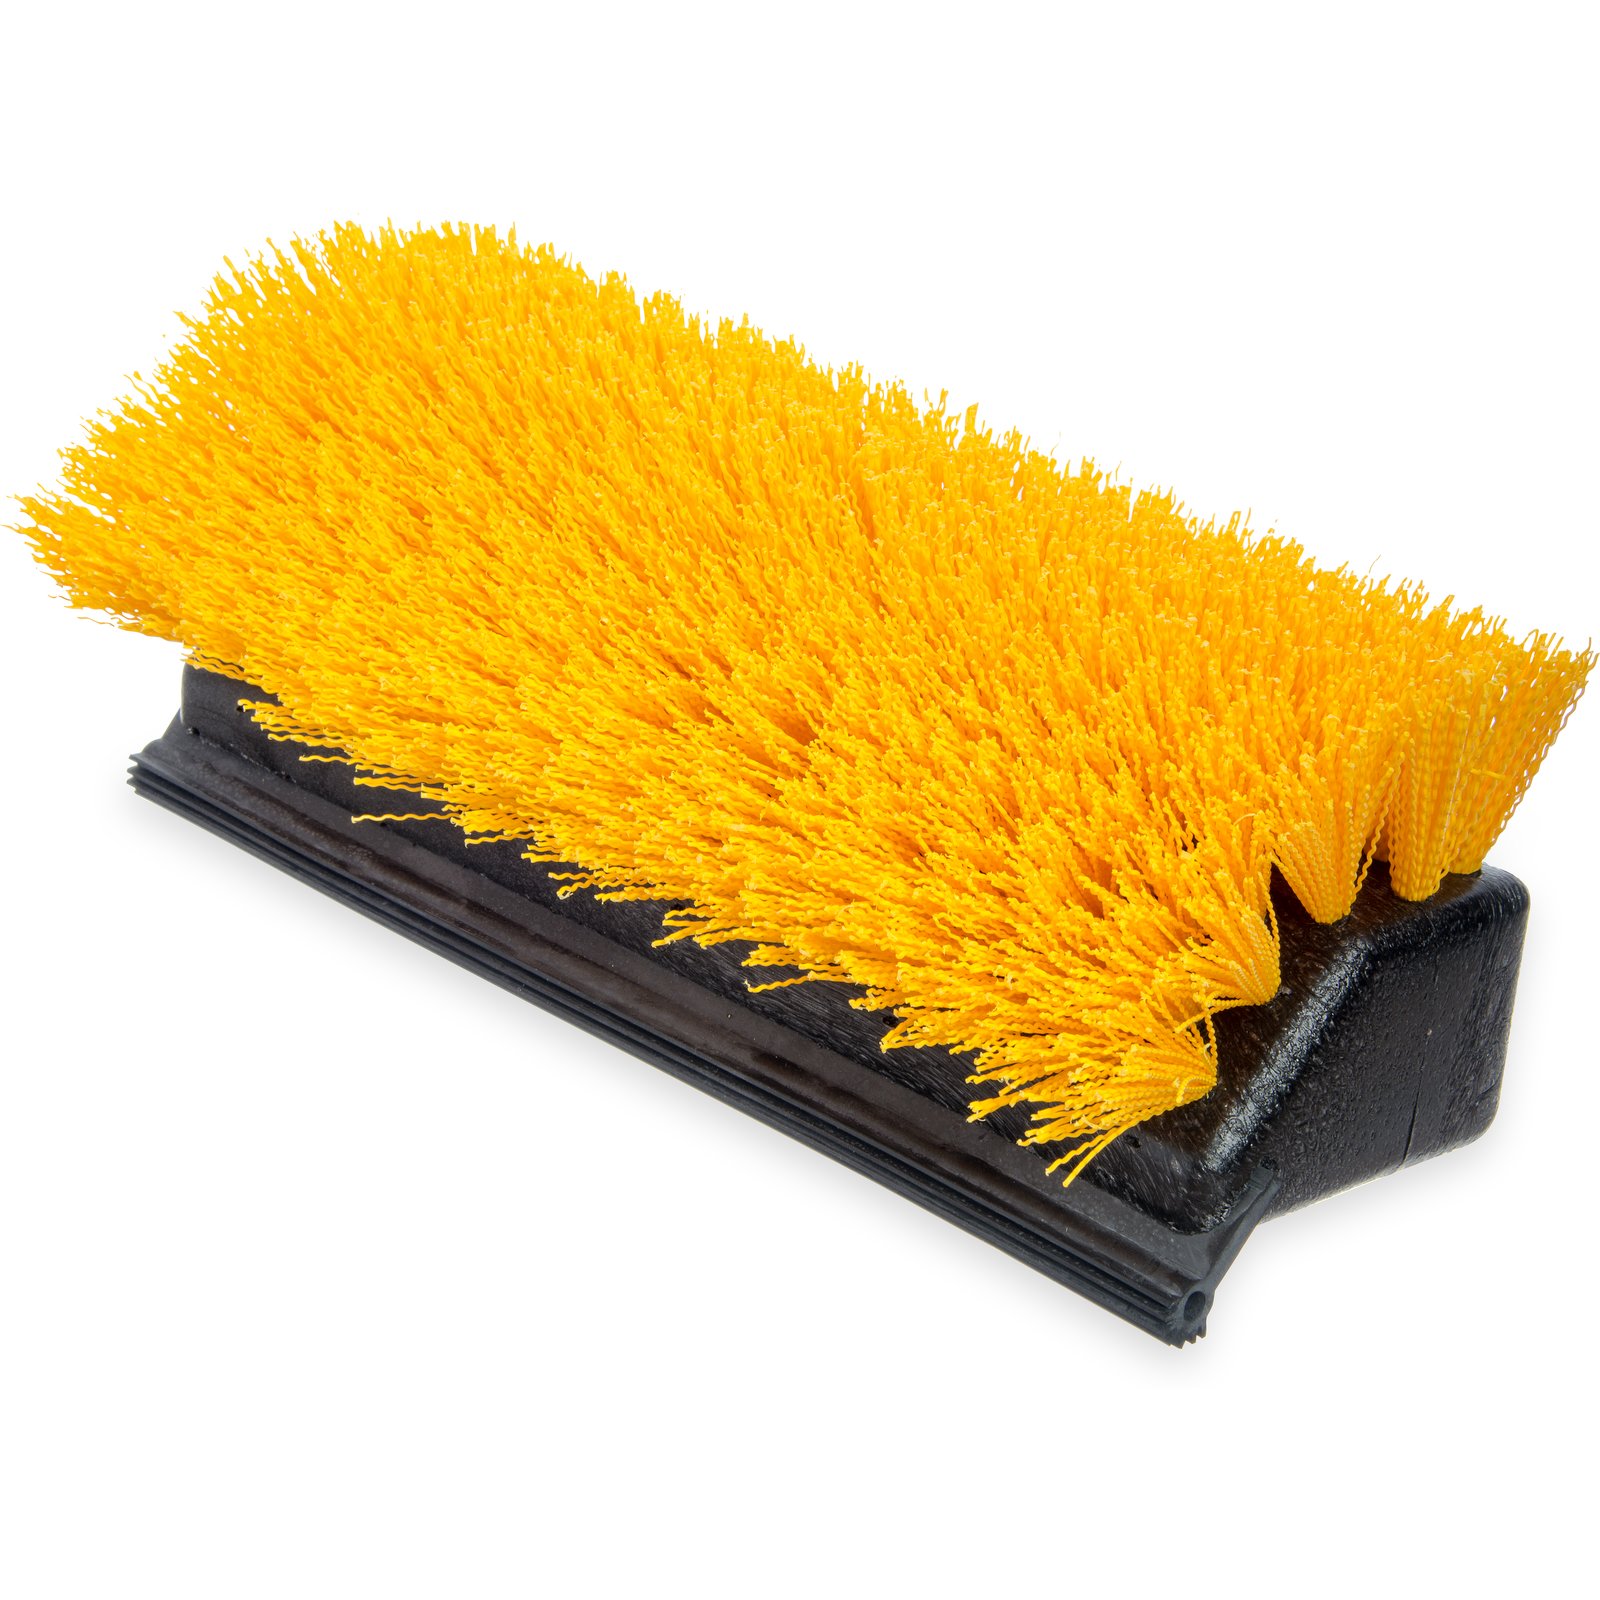 This Best-Selling Scrubbing Brush Is Discounted During 's